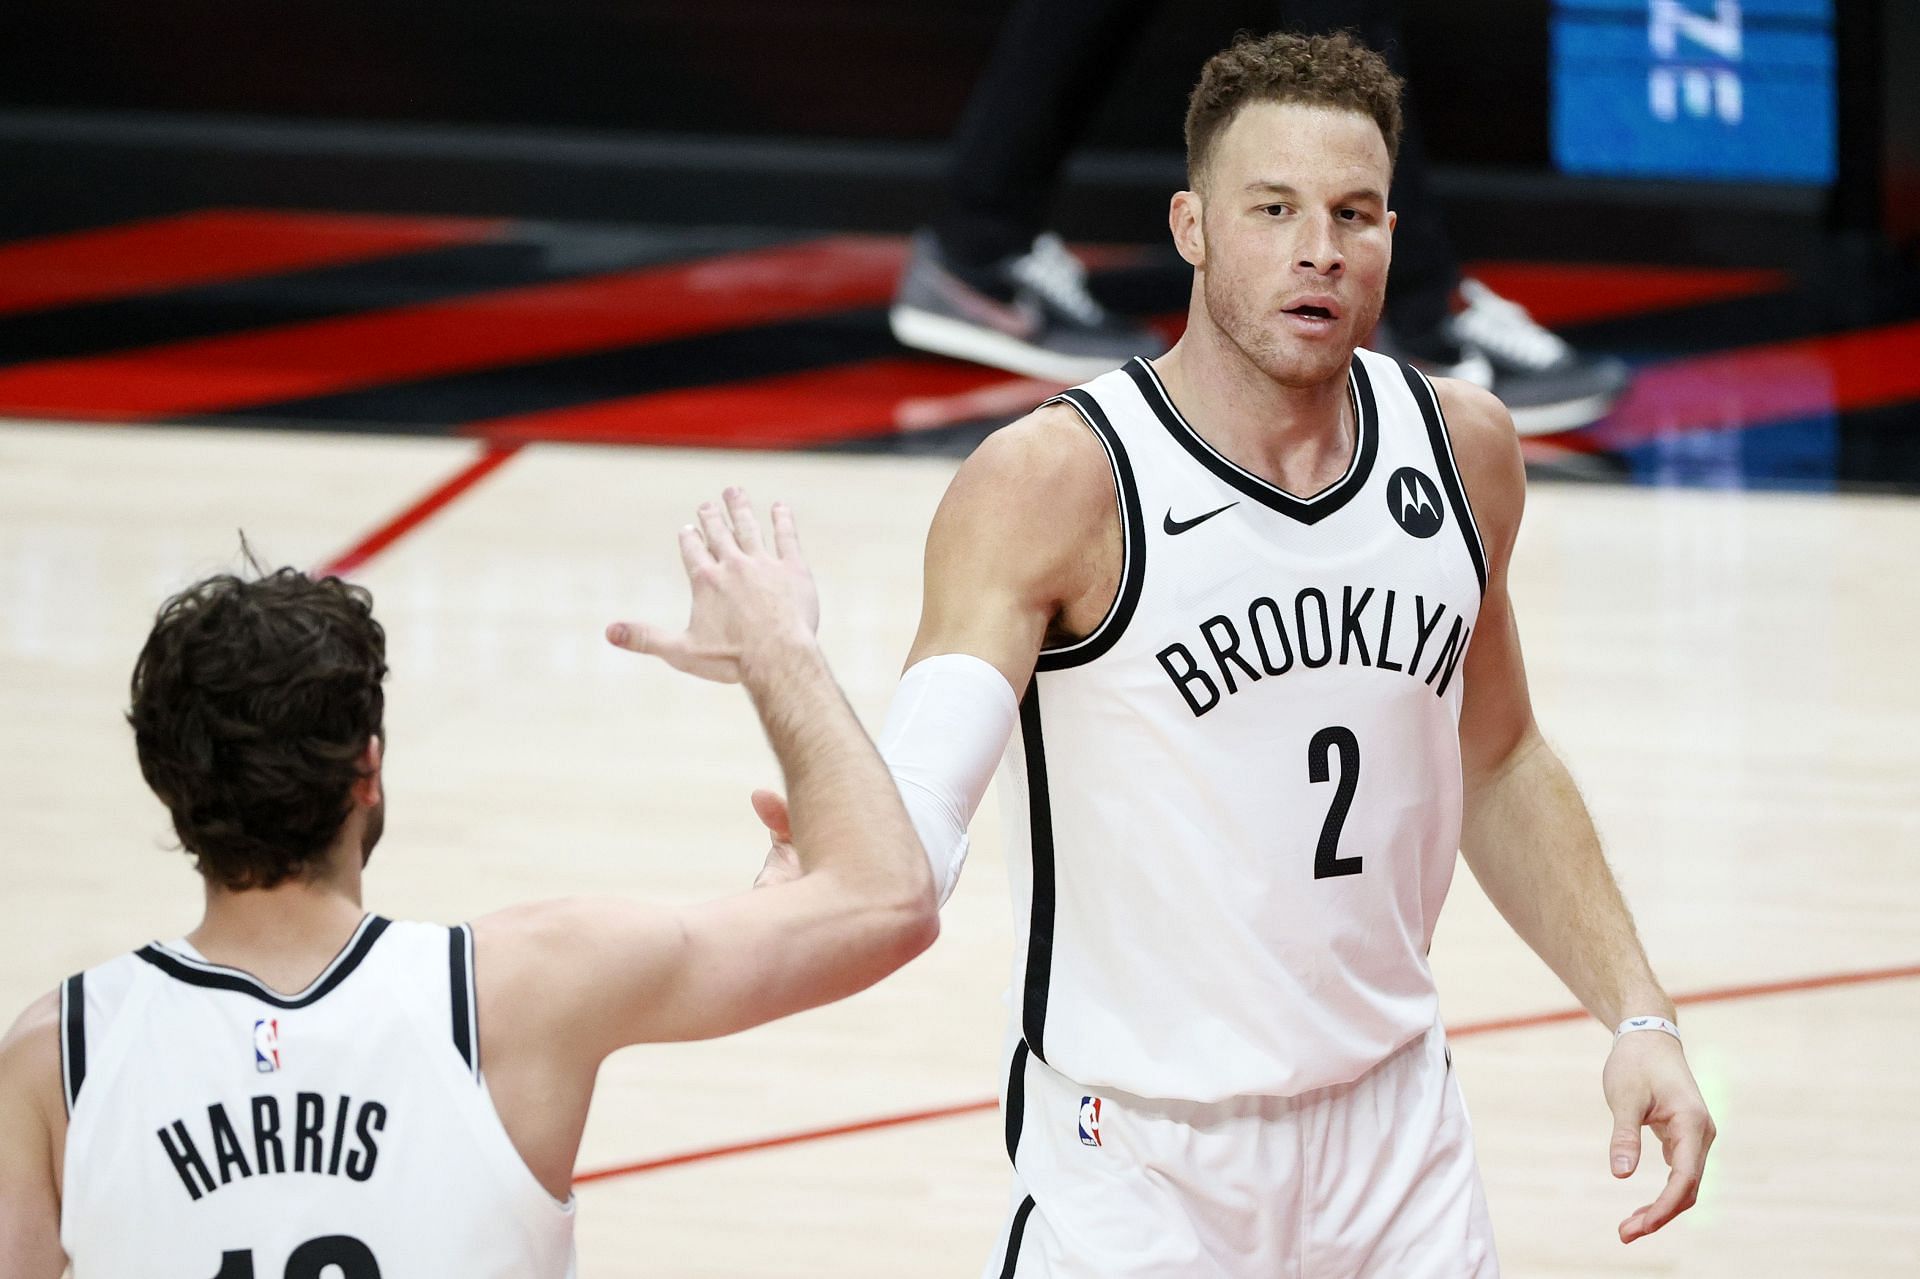 Could Joe Harris and Blake Griffin be in the middle of a slump for the Brooklyn Nets?